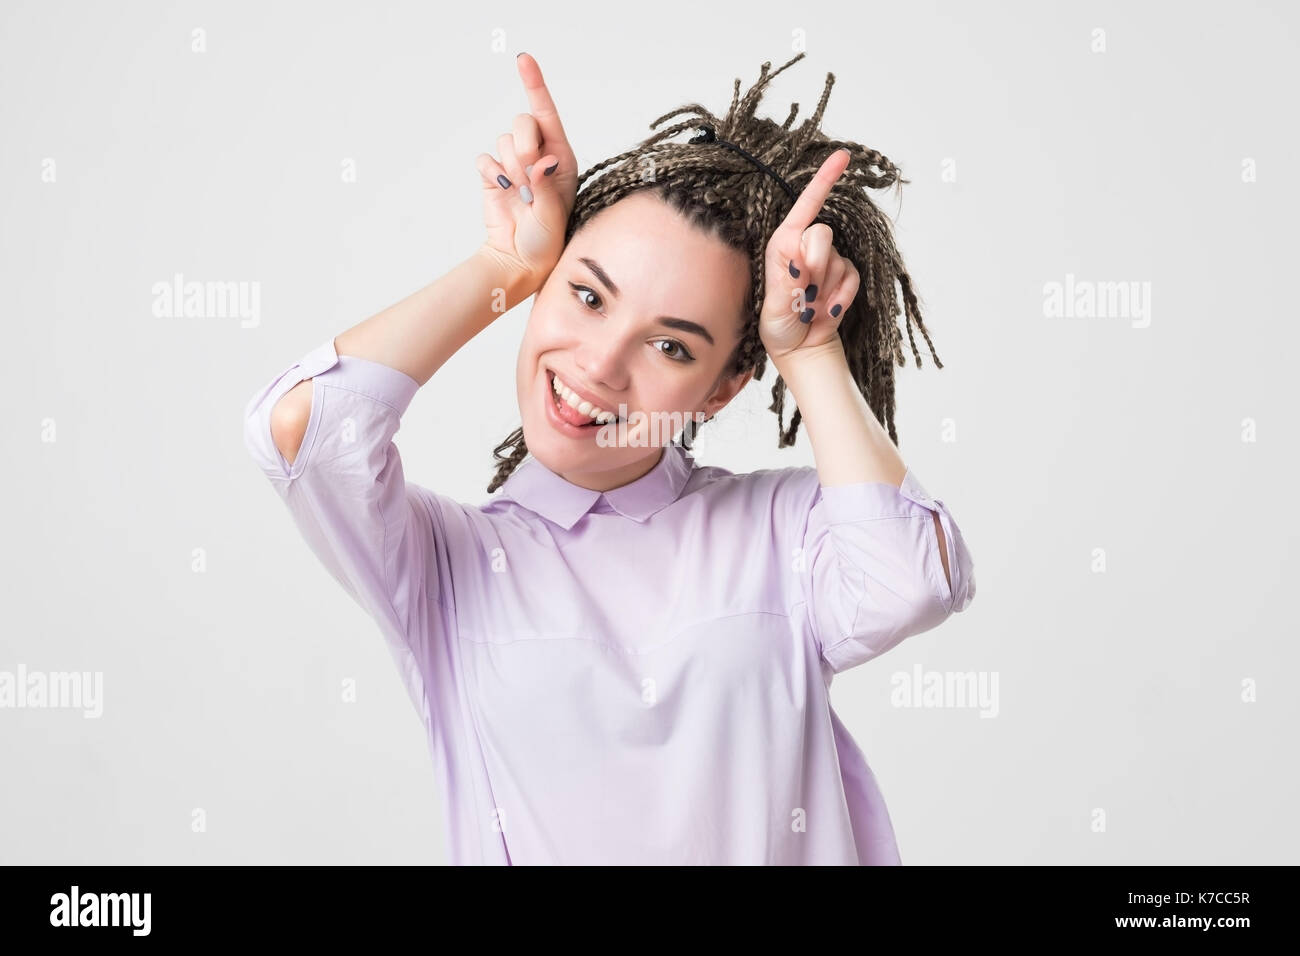 Playful teen girl with braids shows horns Stock Photo